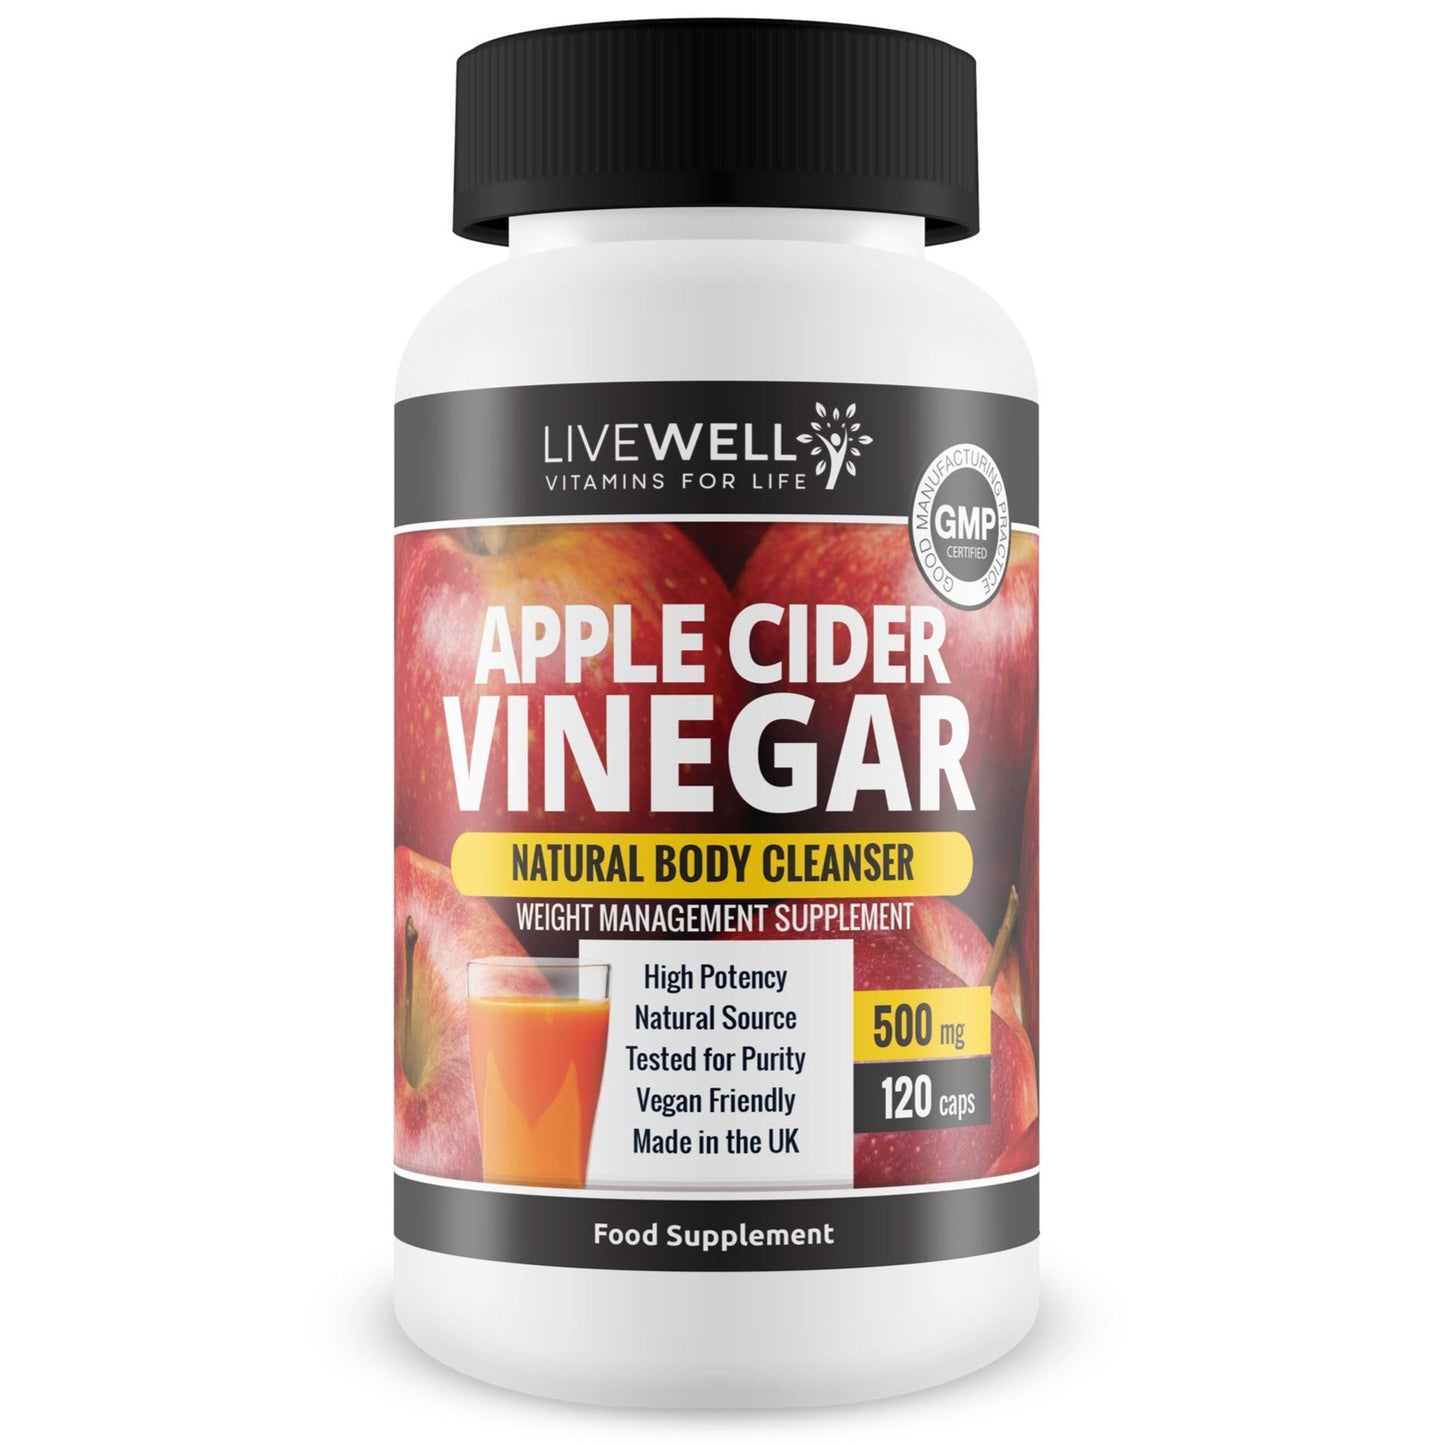 Apple Cider Vinegar 120 Capsules – 1000mg Daily Dosage - Weight Loss - Keto Diet